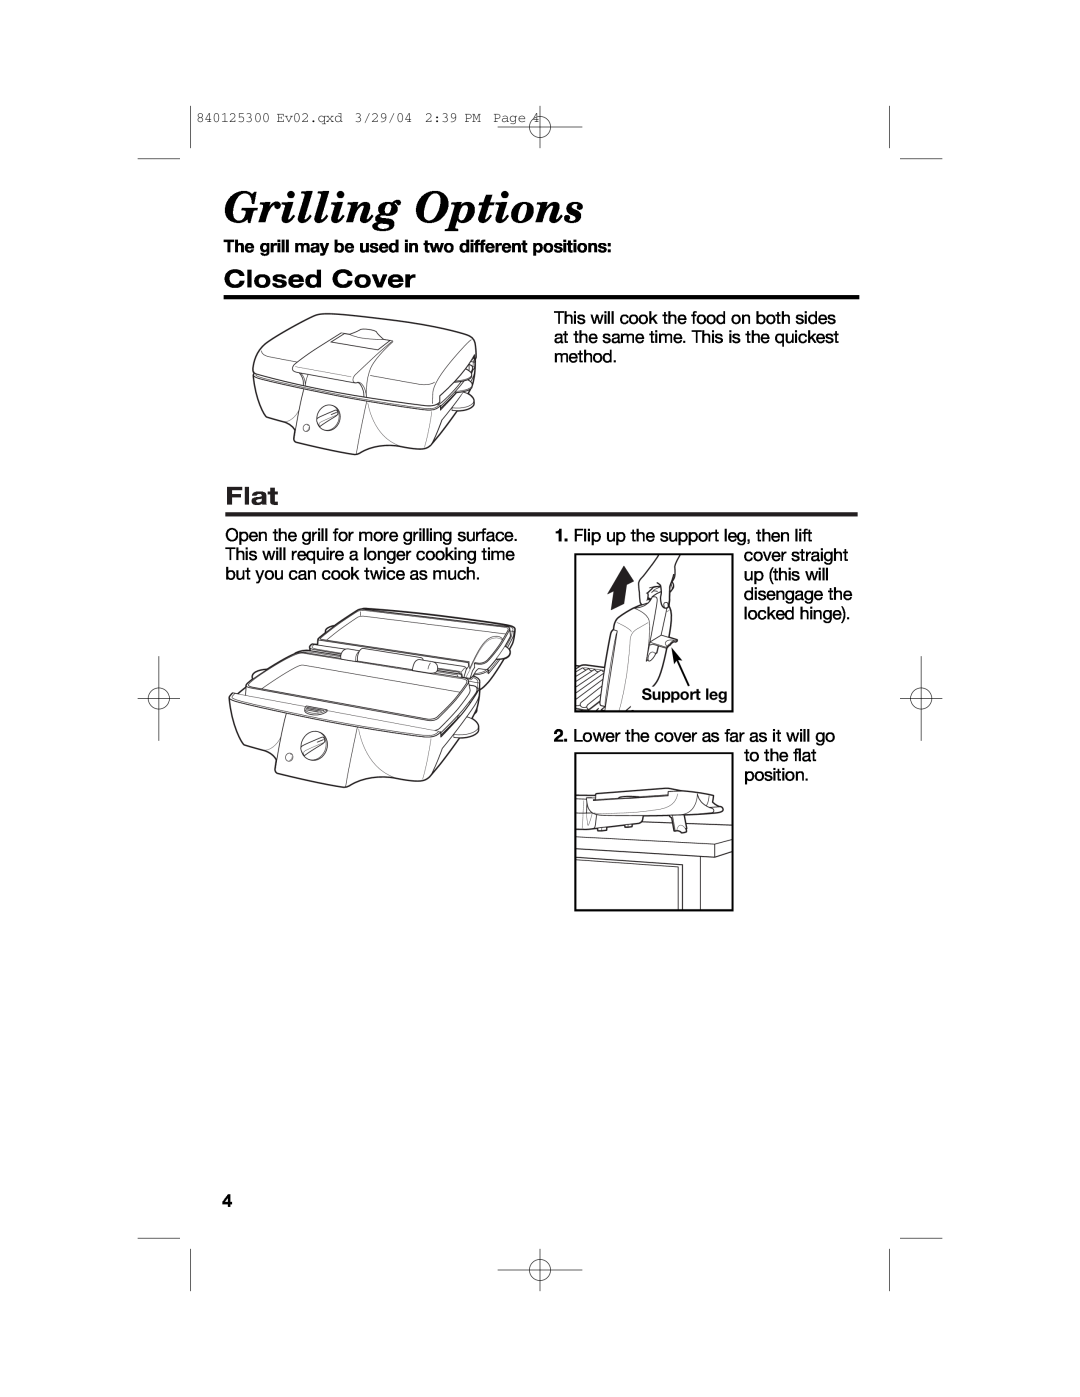 Hamilton Beach 25295 manual Grilling Options, Closed Cover, Flat, The grill may be used in two different positions 